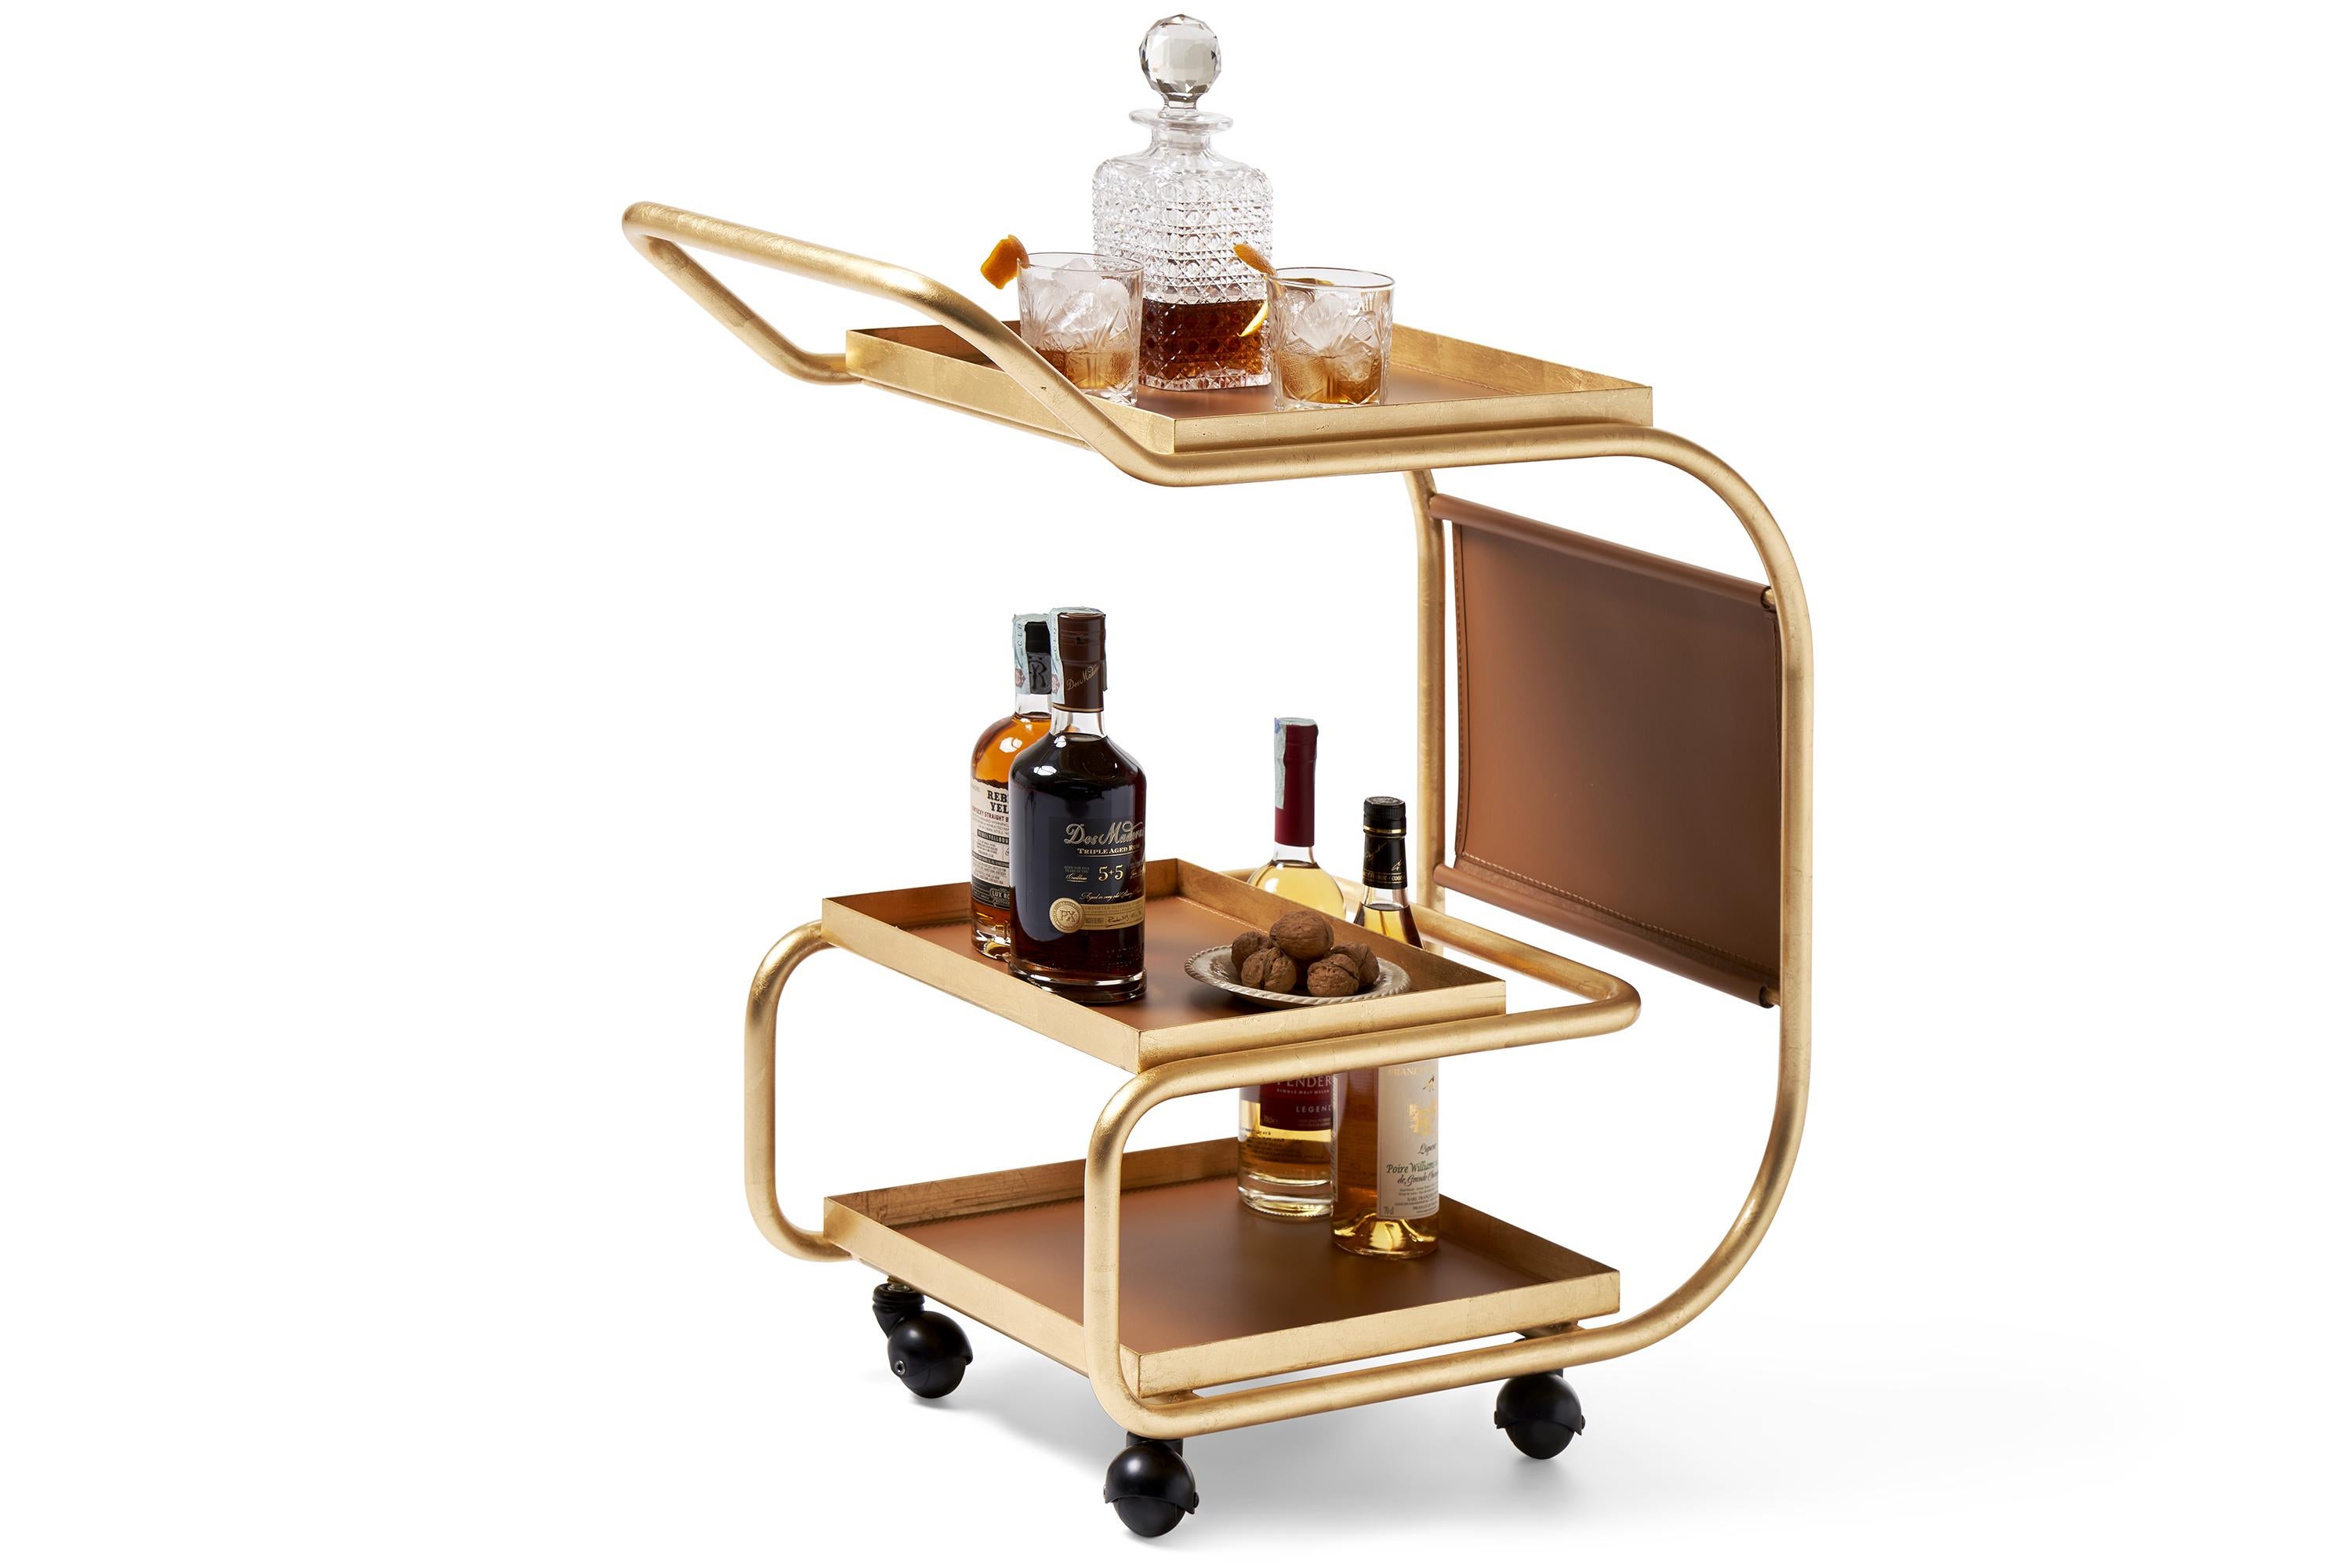 A trolley, a bar cart, an independent workstation… Zenzero is surprising, peppery, engaging, it is hospitality on wheels.

Three steel trays are supported by a sinuous structure made of thin steel tubes, with a convenient pocket in regenerated